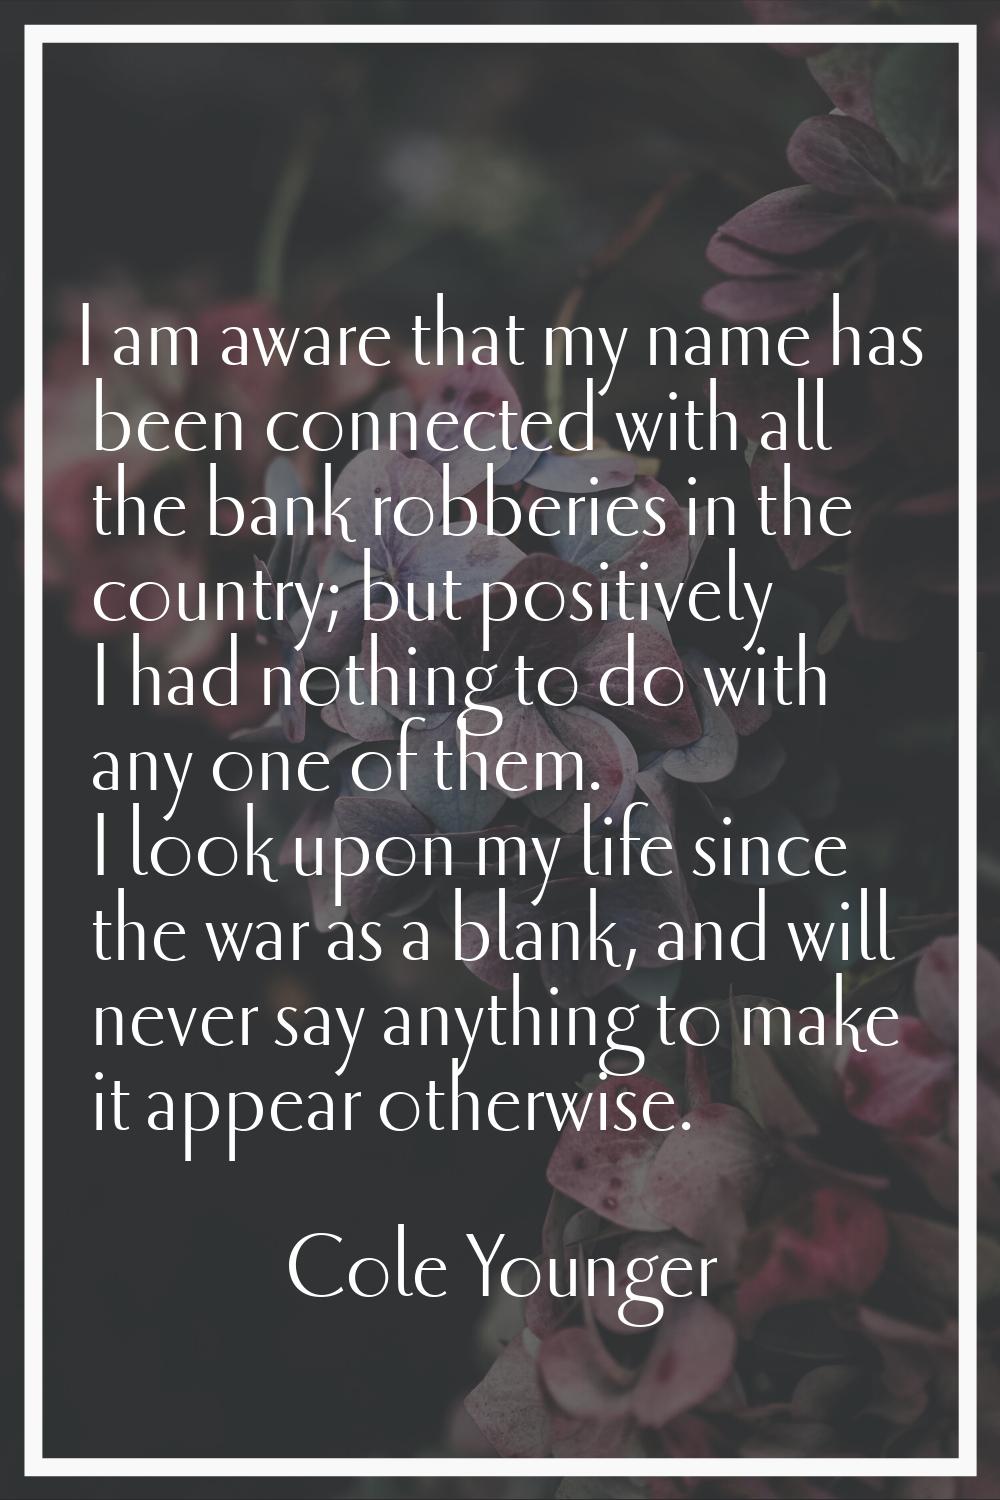 I am aware that my name has been connected with all the bank robberies in the country; but positive